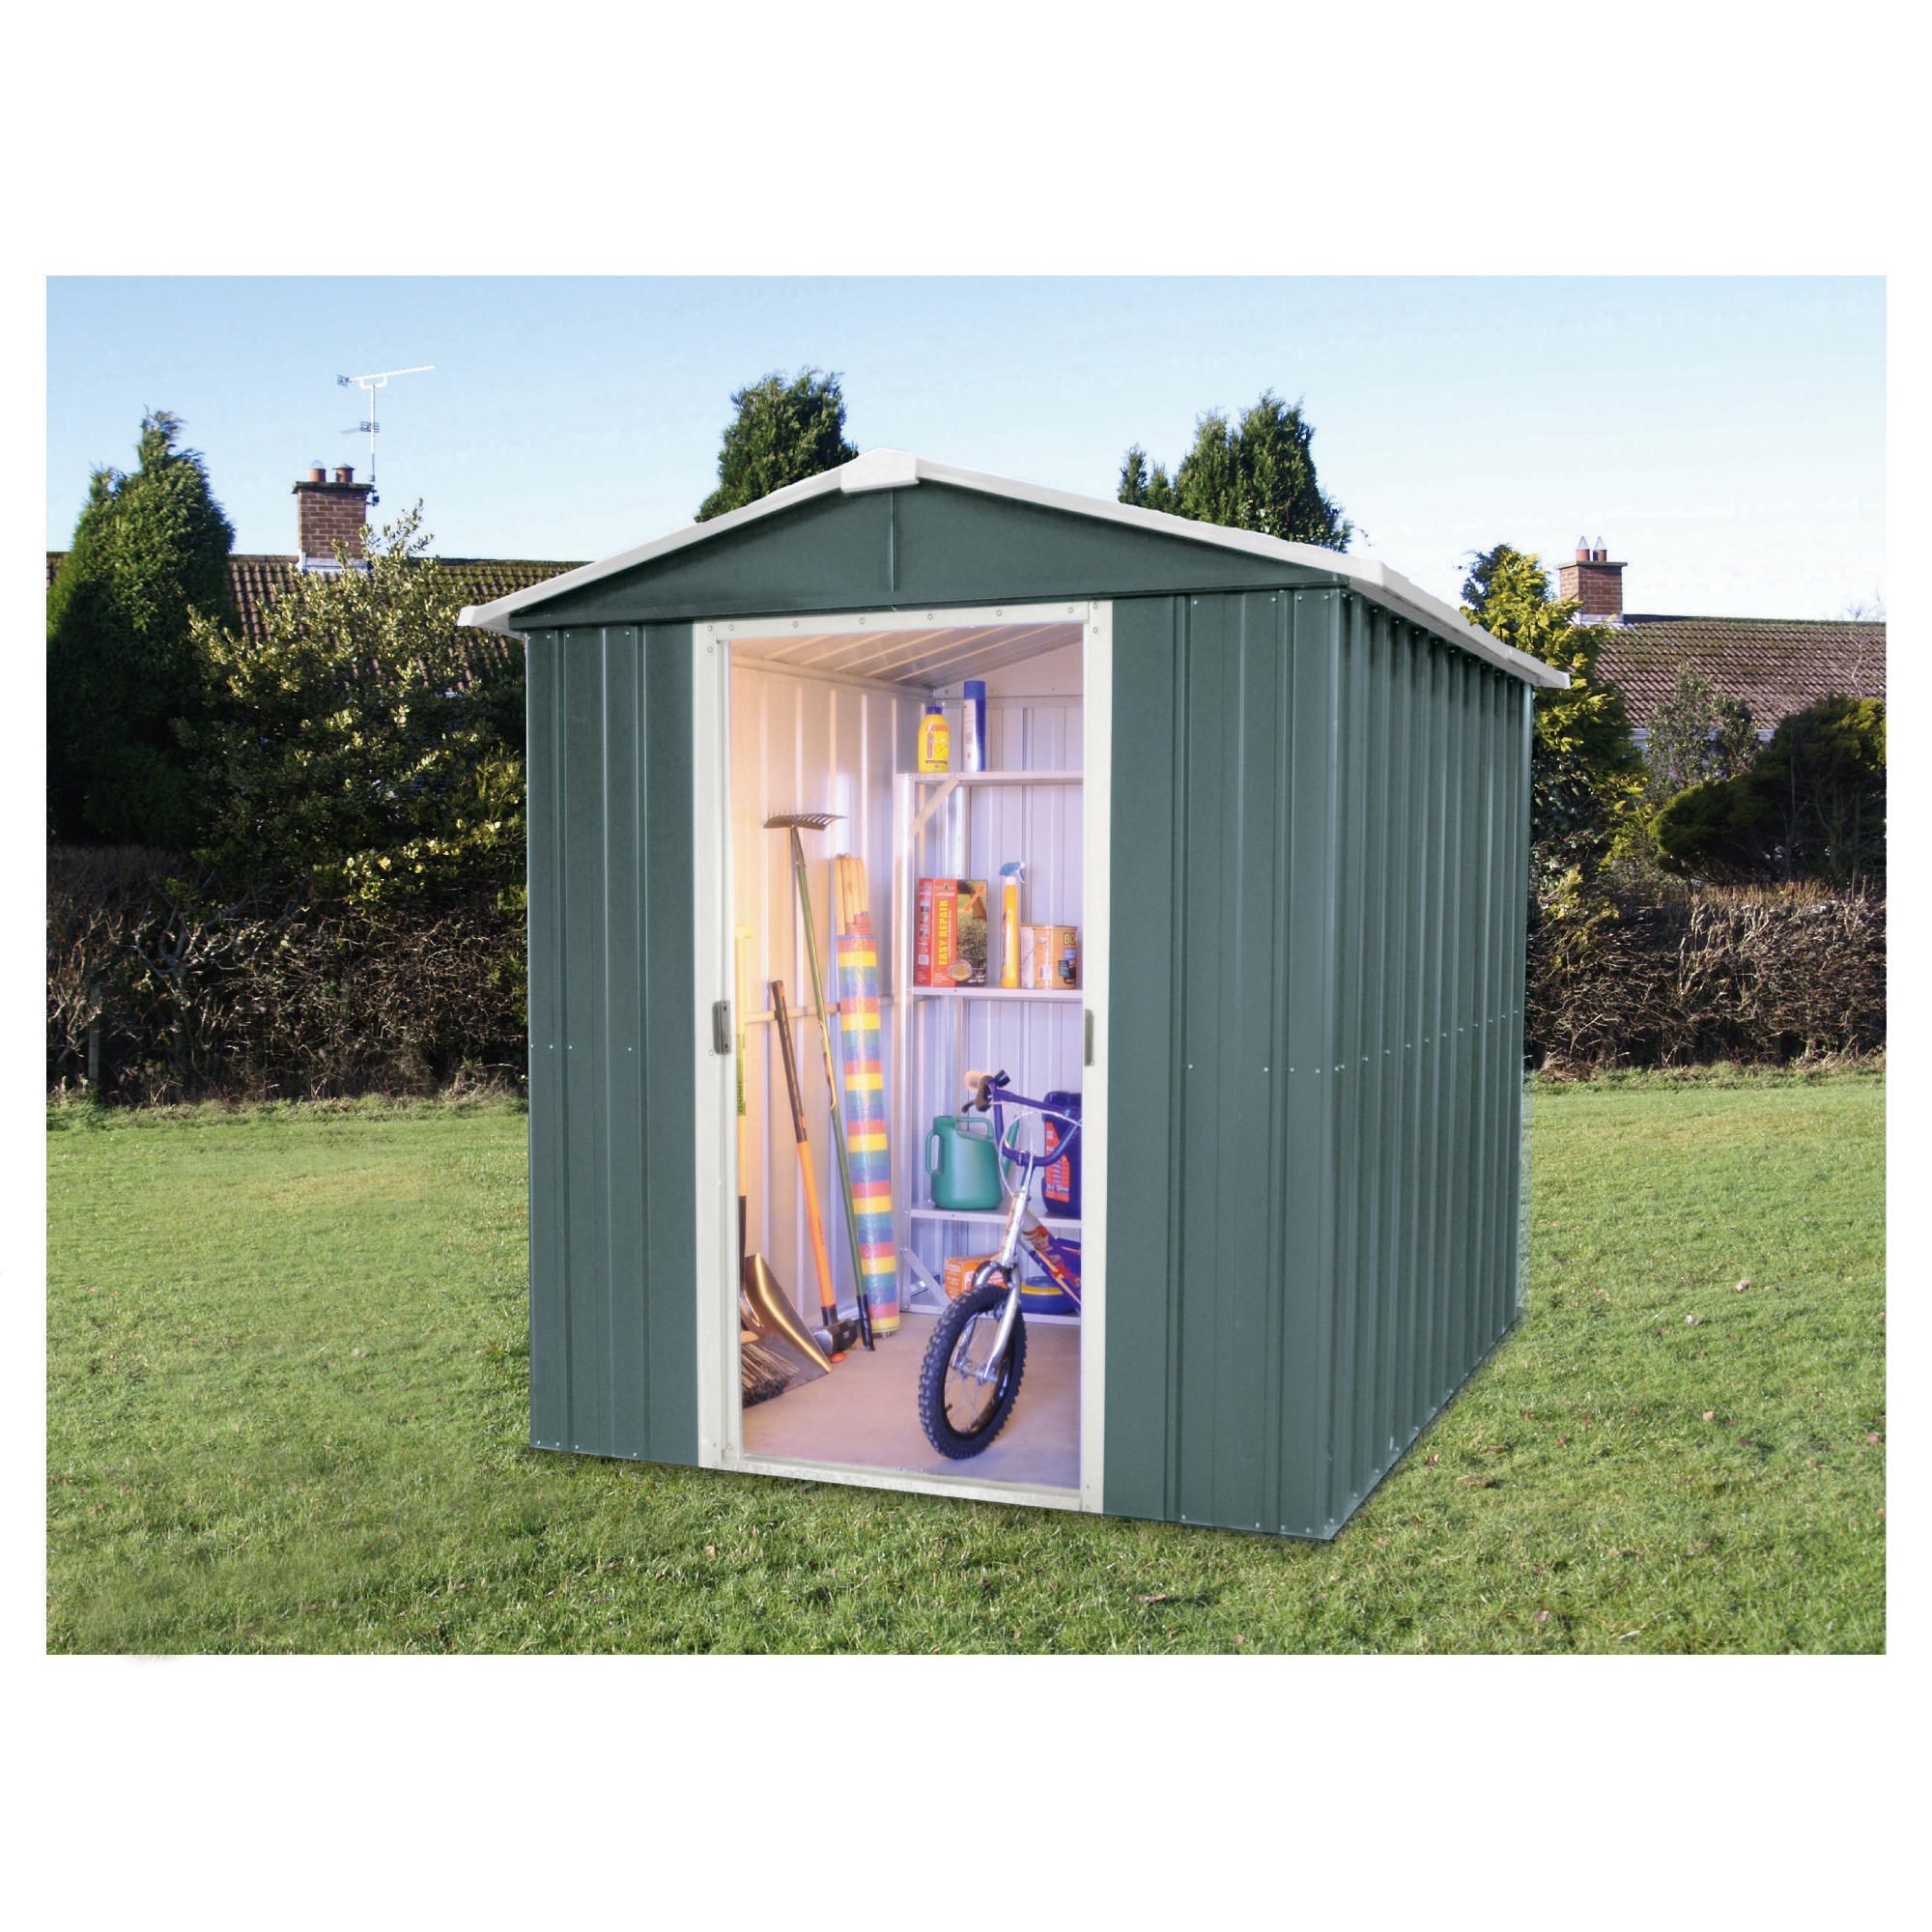 Yardmaster 6 1x7 5 Titan Metal Apex Shed With Floor Support Frame